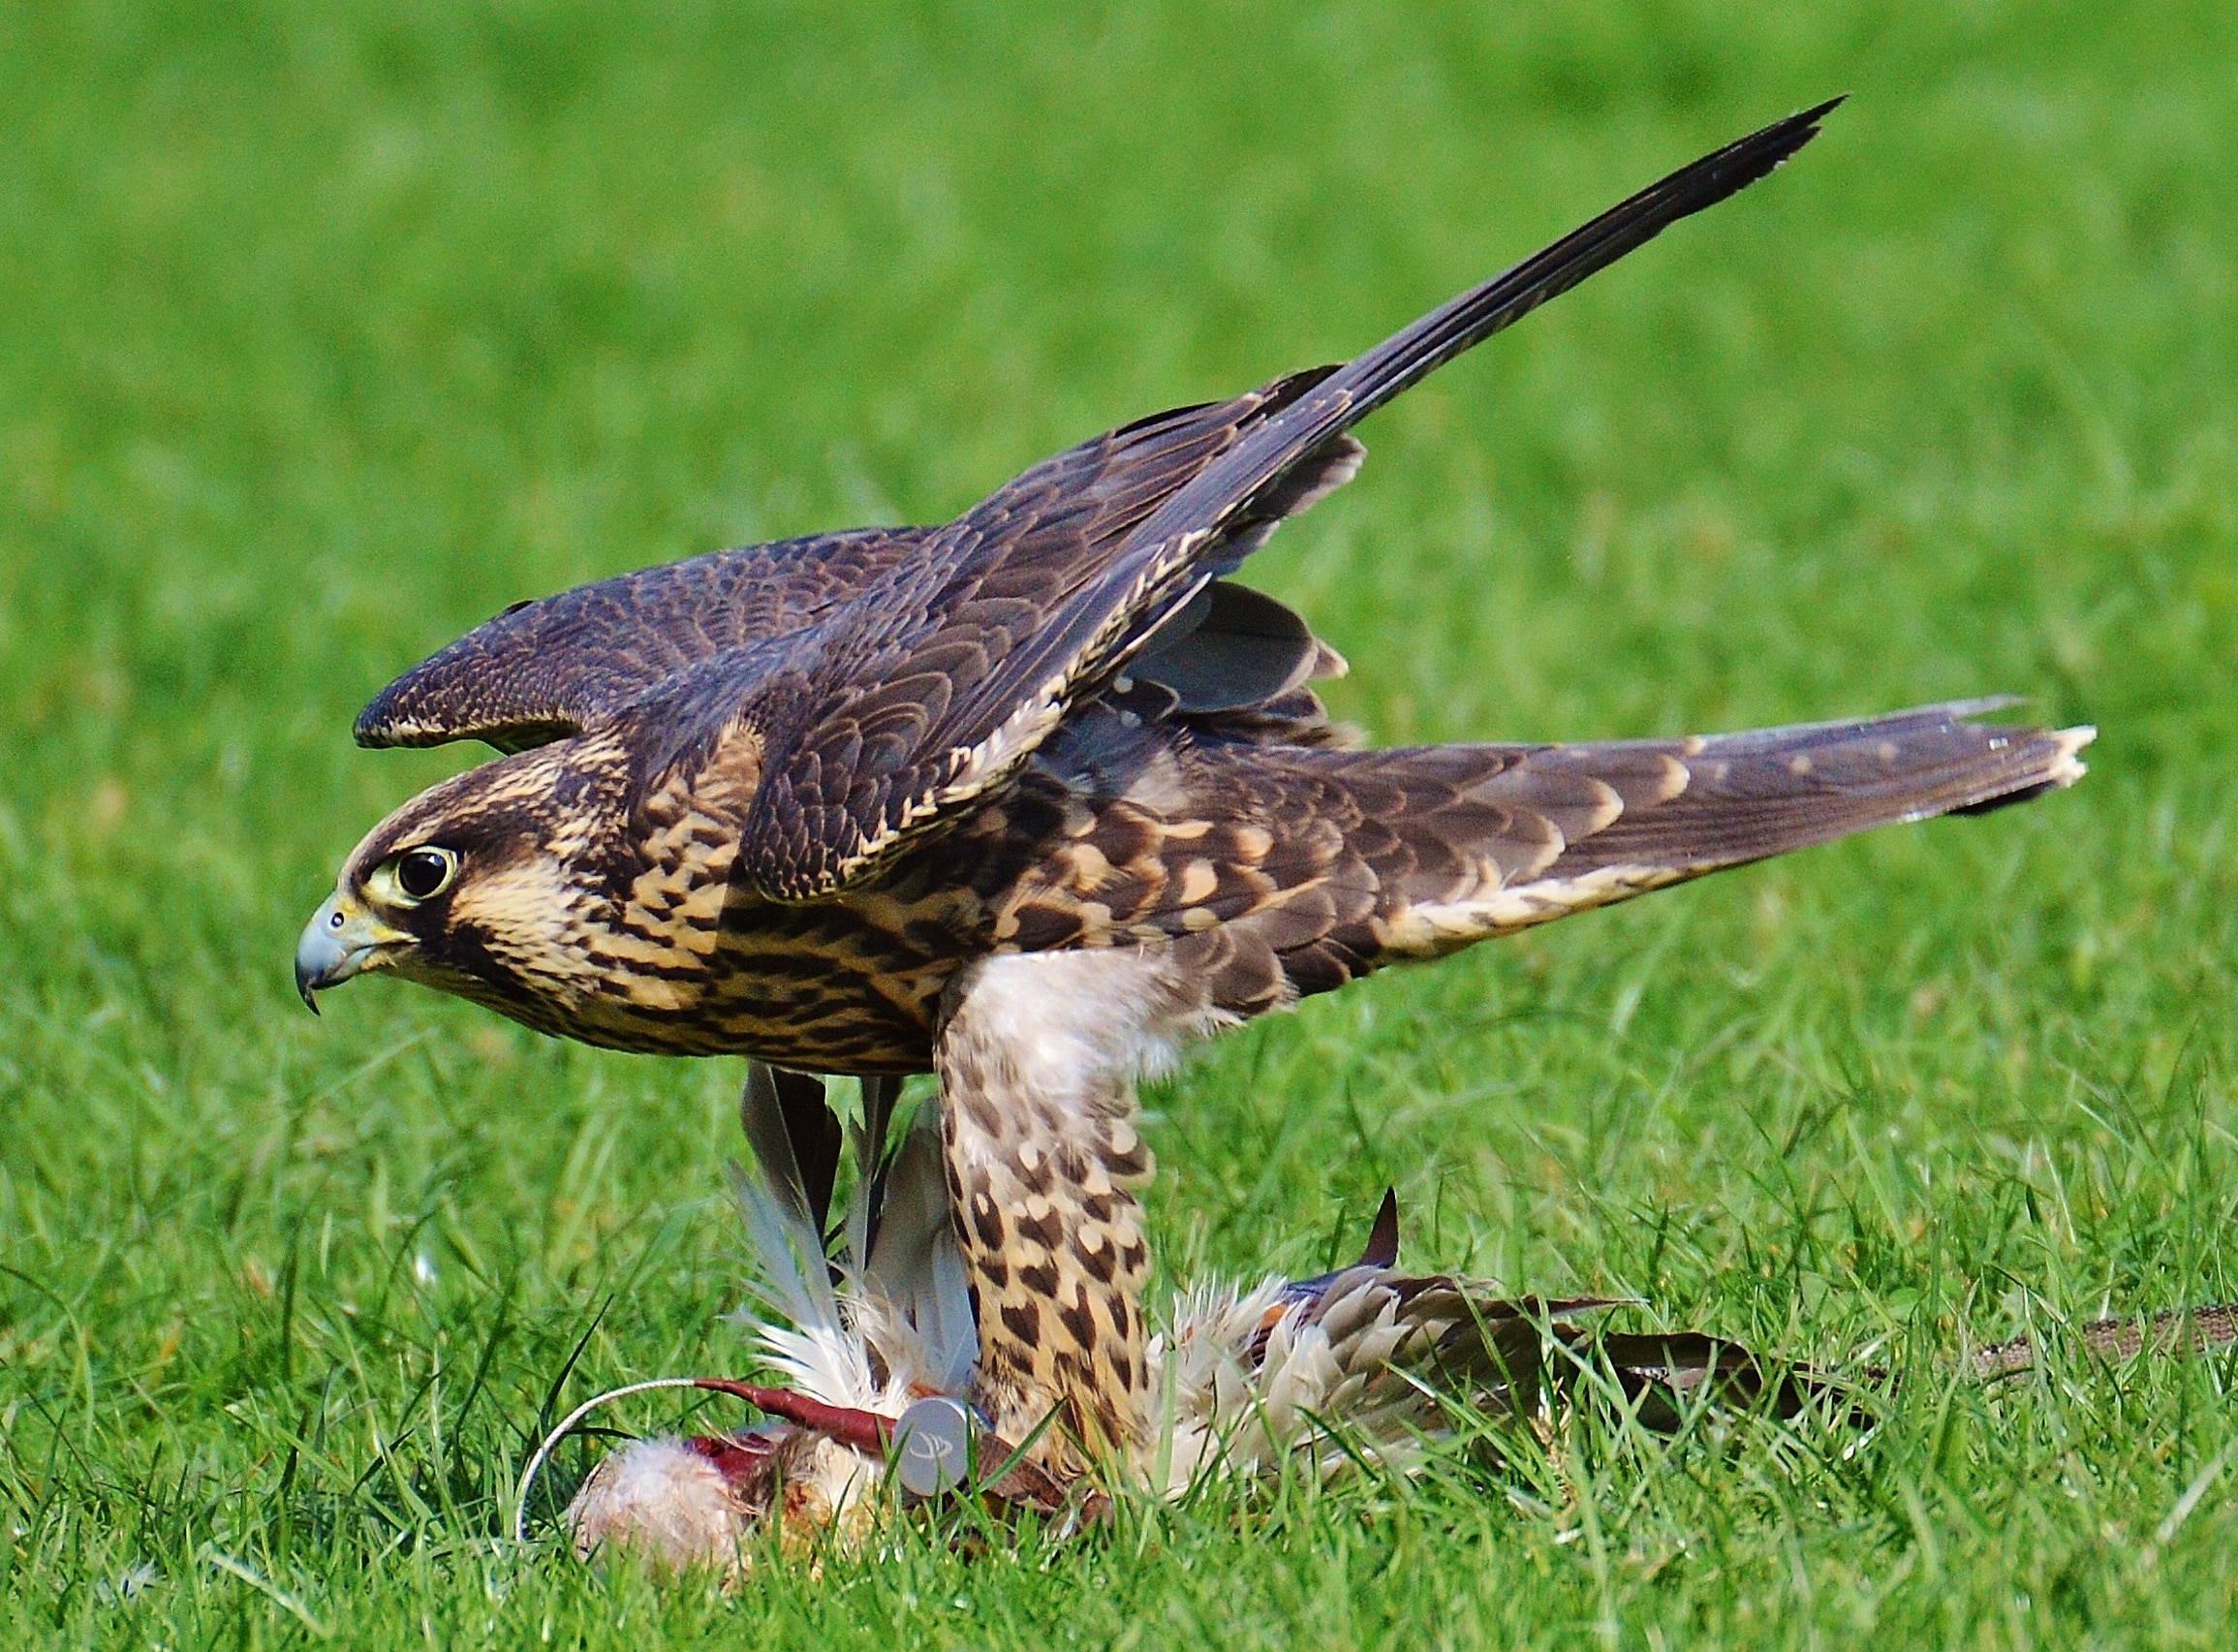 Access, Wildpark Poing, Falcon, Prey, grass, one animal